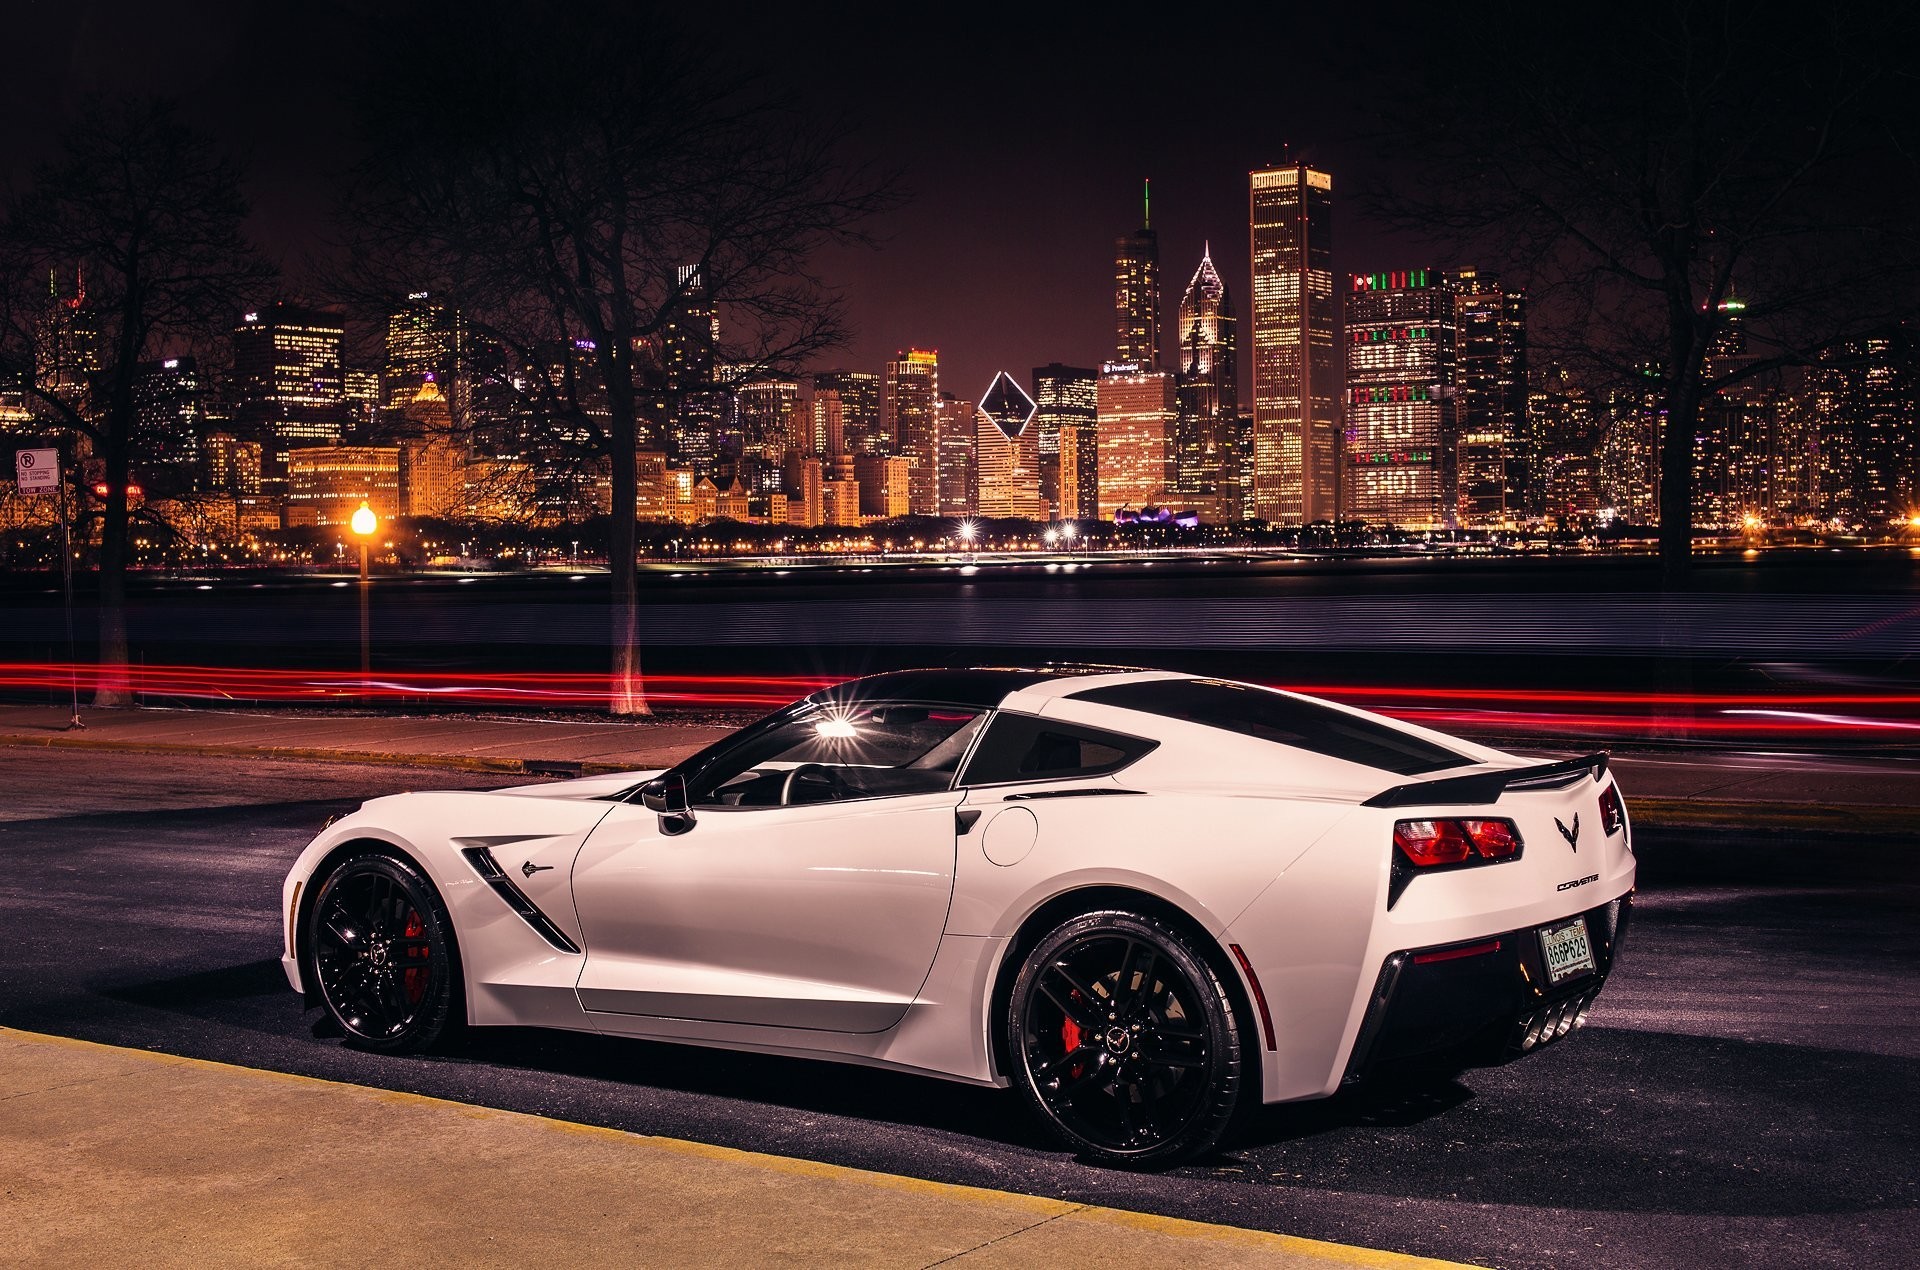 1920x1270 chevrolet corvette stingray coupe c7 night extract light road town chicago  united states